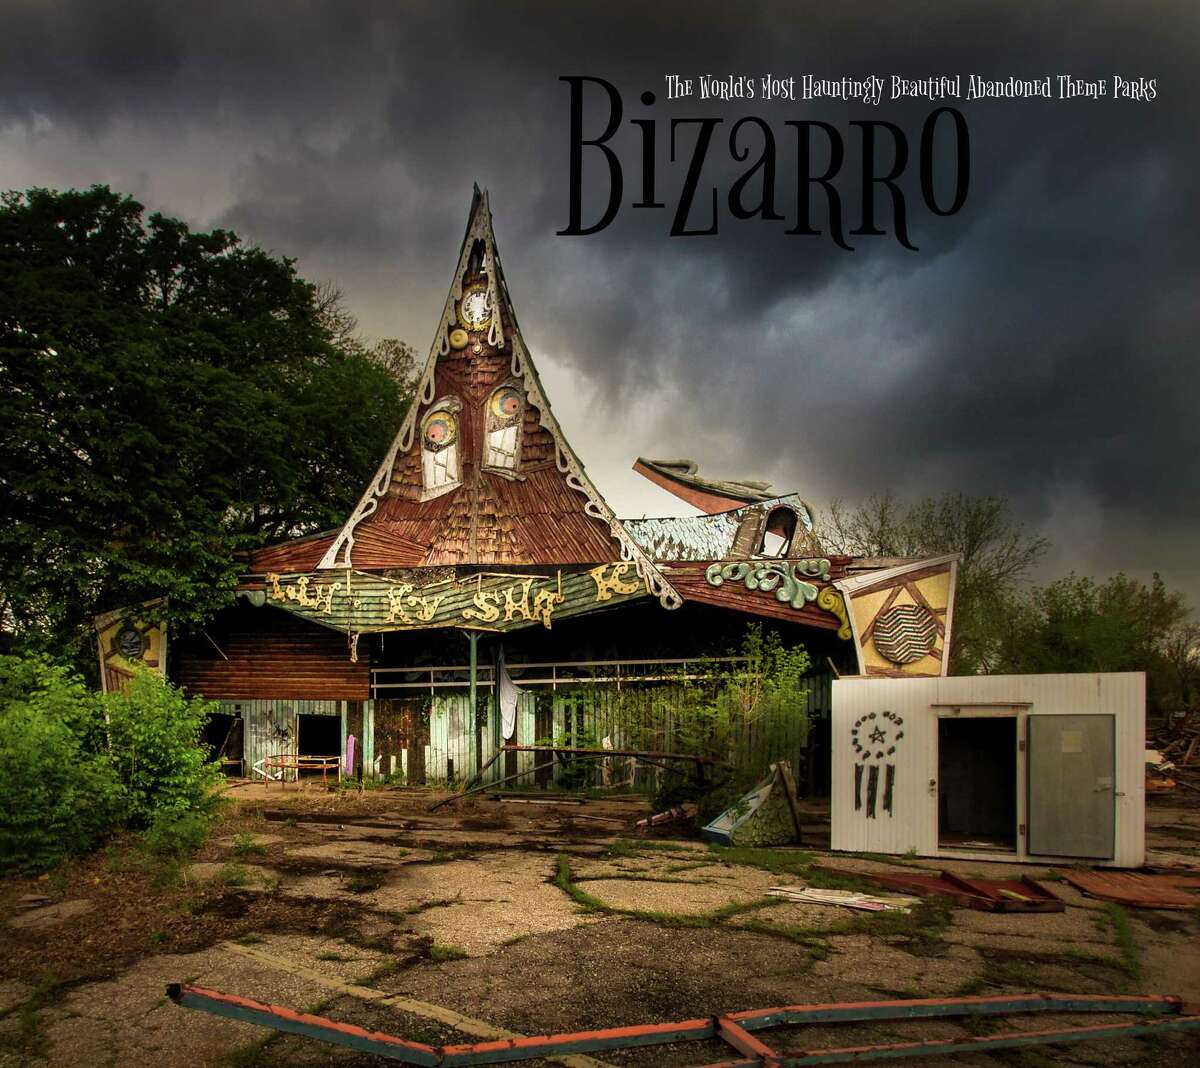 Photographer Seph Lawless, who specializes in landmarks in disrepair, captured images of the abandoned Land of Oz in Beech Mountain, North Carolina for his new book "Bizarro: The World's Most Hauntingly Beautiful Abandoned Amusement Parks."